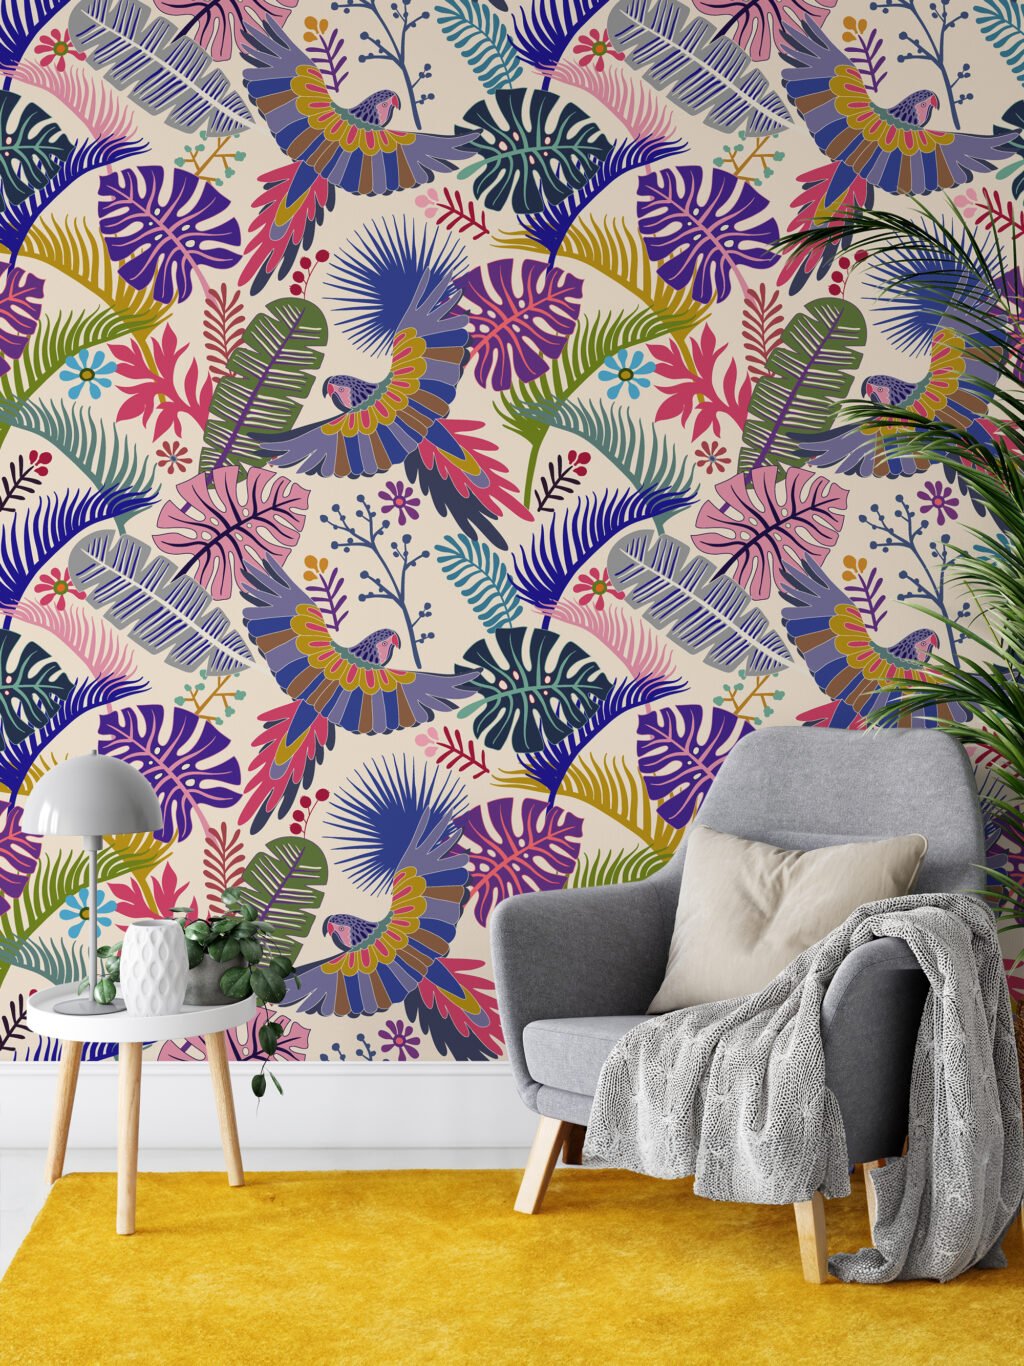 Colorful Tropical Illustration With Parrots Wallpaper, Vibrant Tropical Foliage Peel & Stick Wall Mural